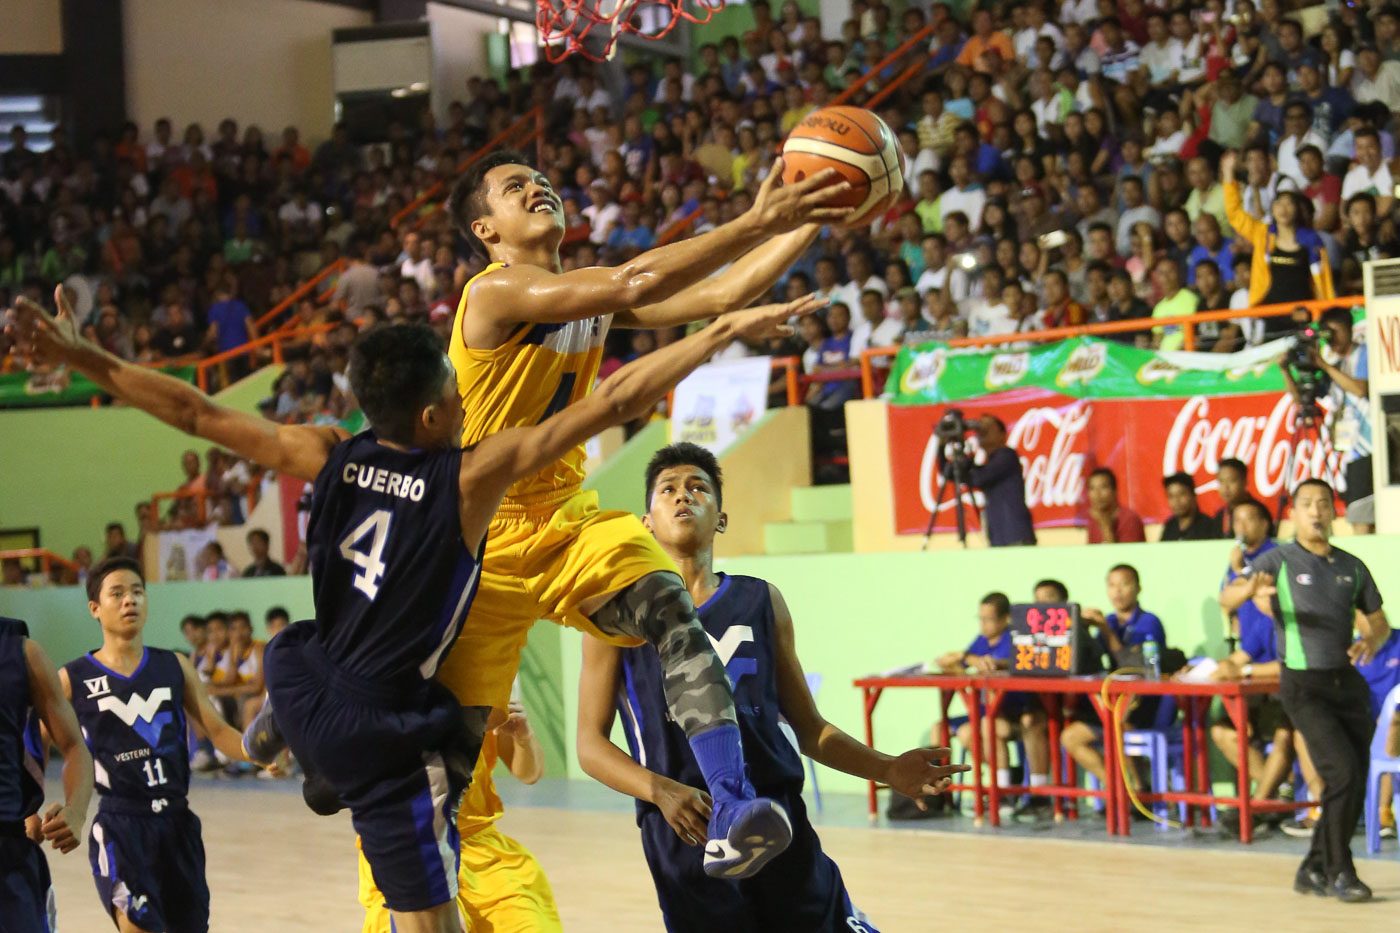 NCR captures basketball secondary finals gold